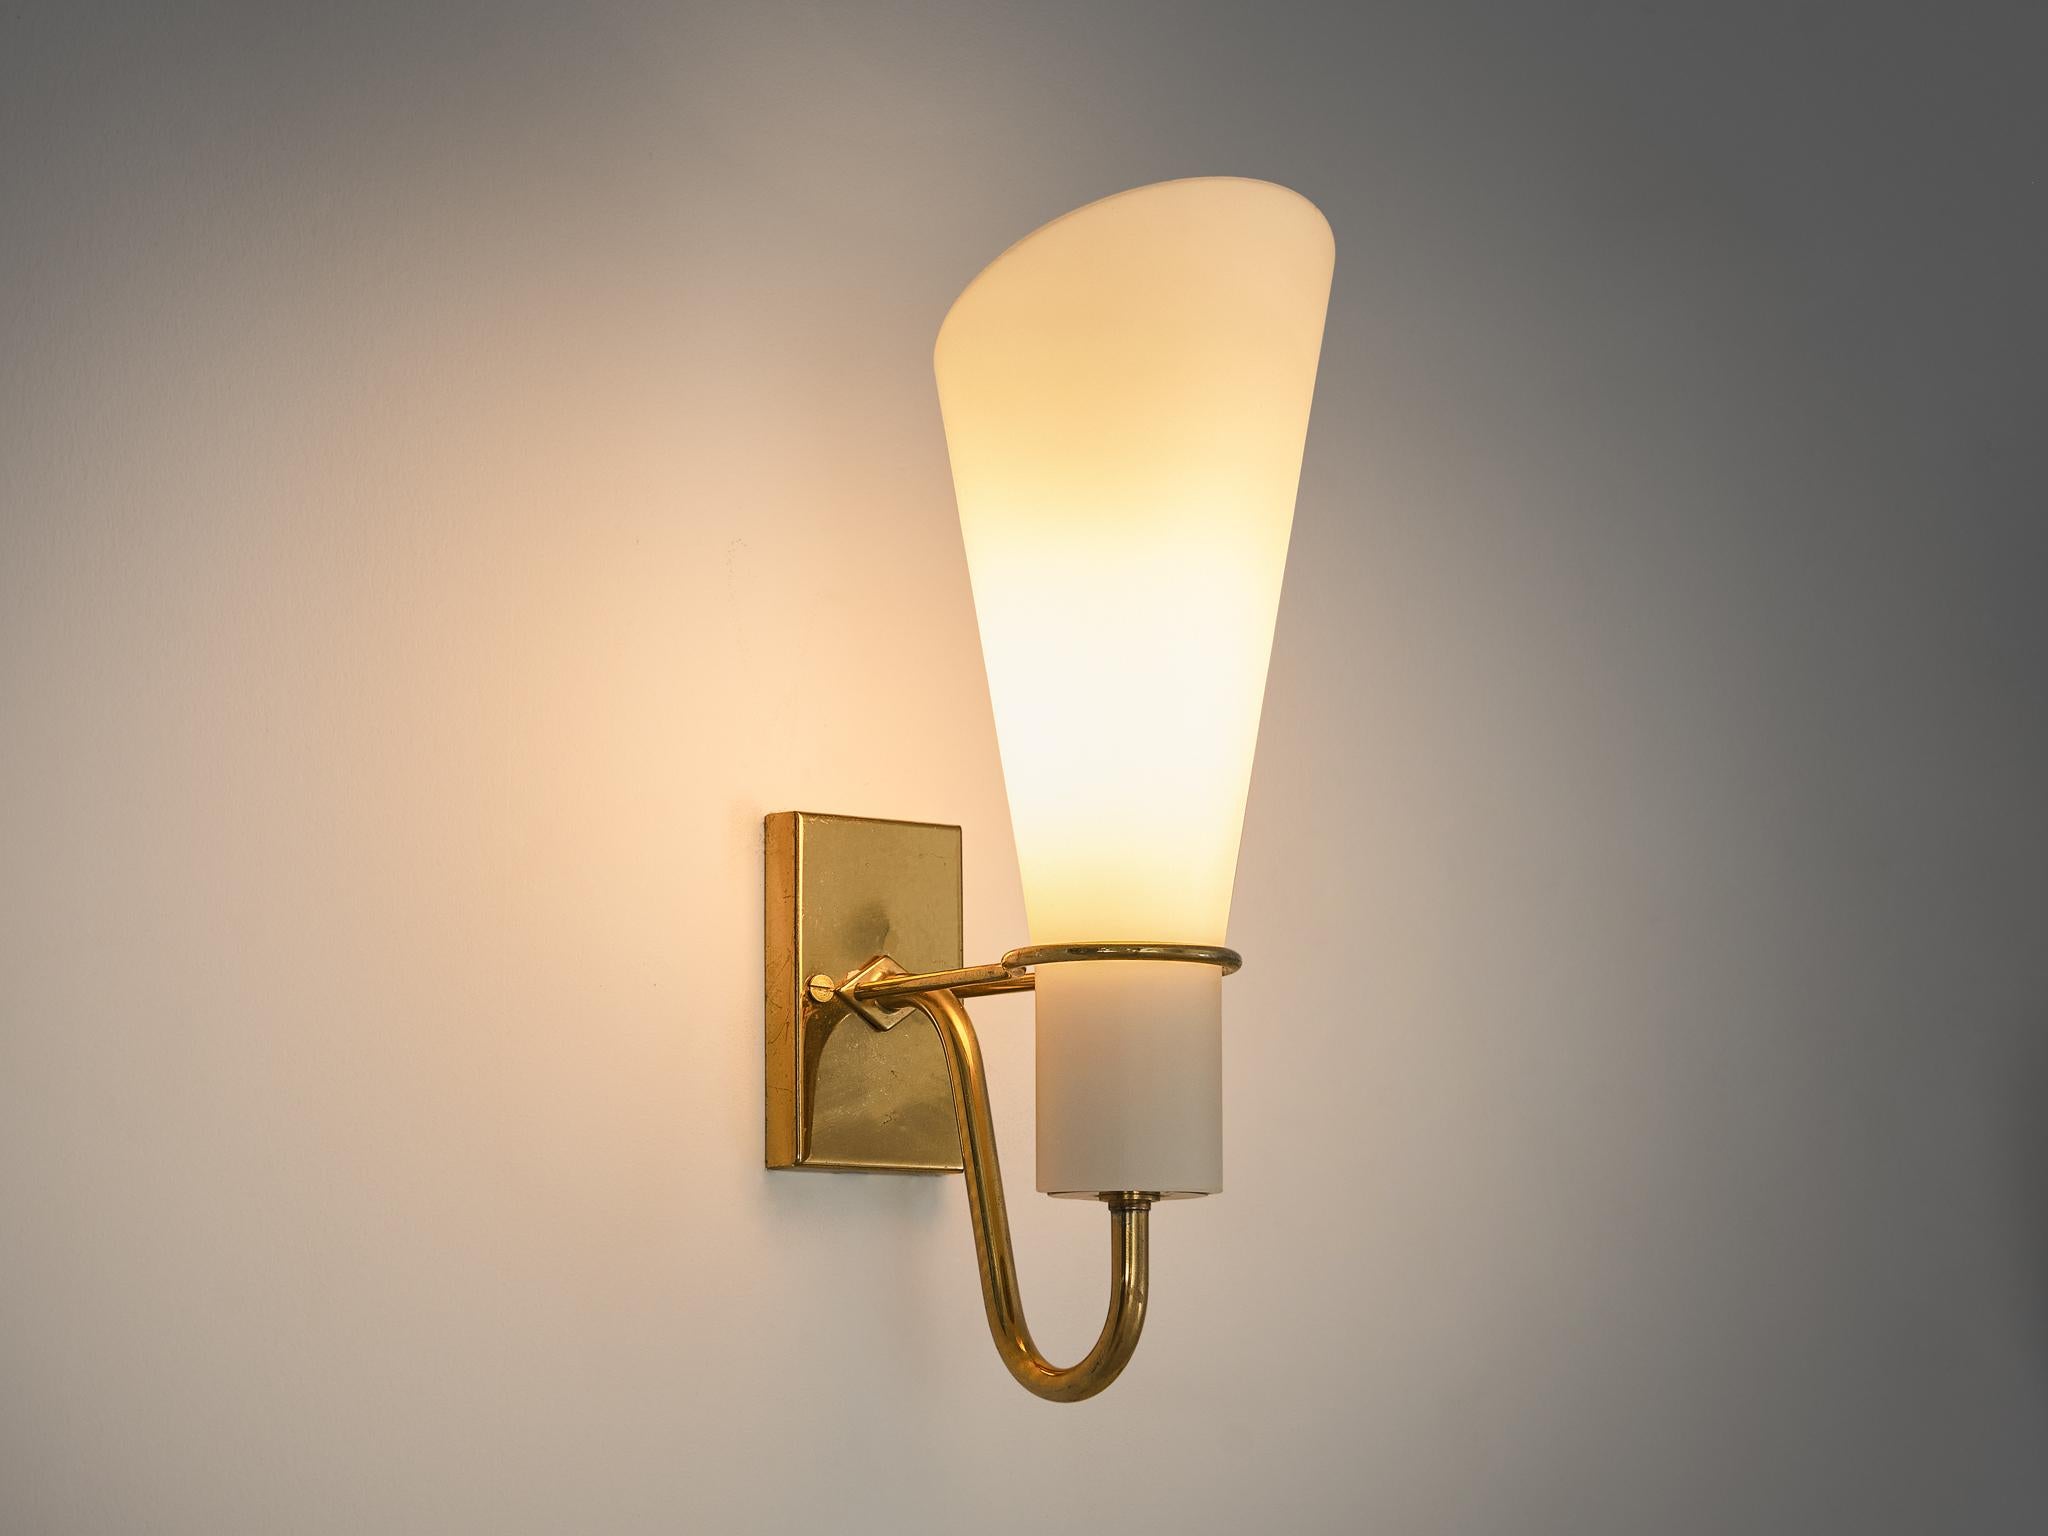 Hans Bergström for ASEA Belysning, wall light, brass, matted glass, Sweden, 1950s

This cone-shaped wall light is held by filigree brass details ending in a small rectangular plate. Due to the matted glass in opaque white the light gets smooth and